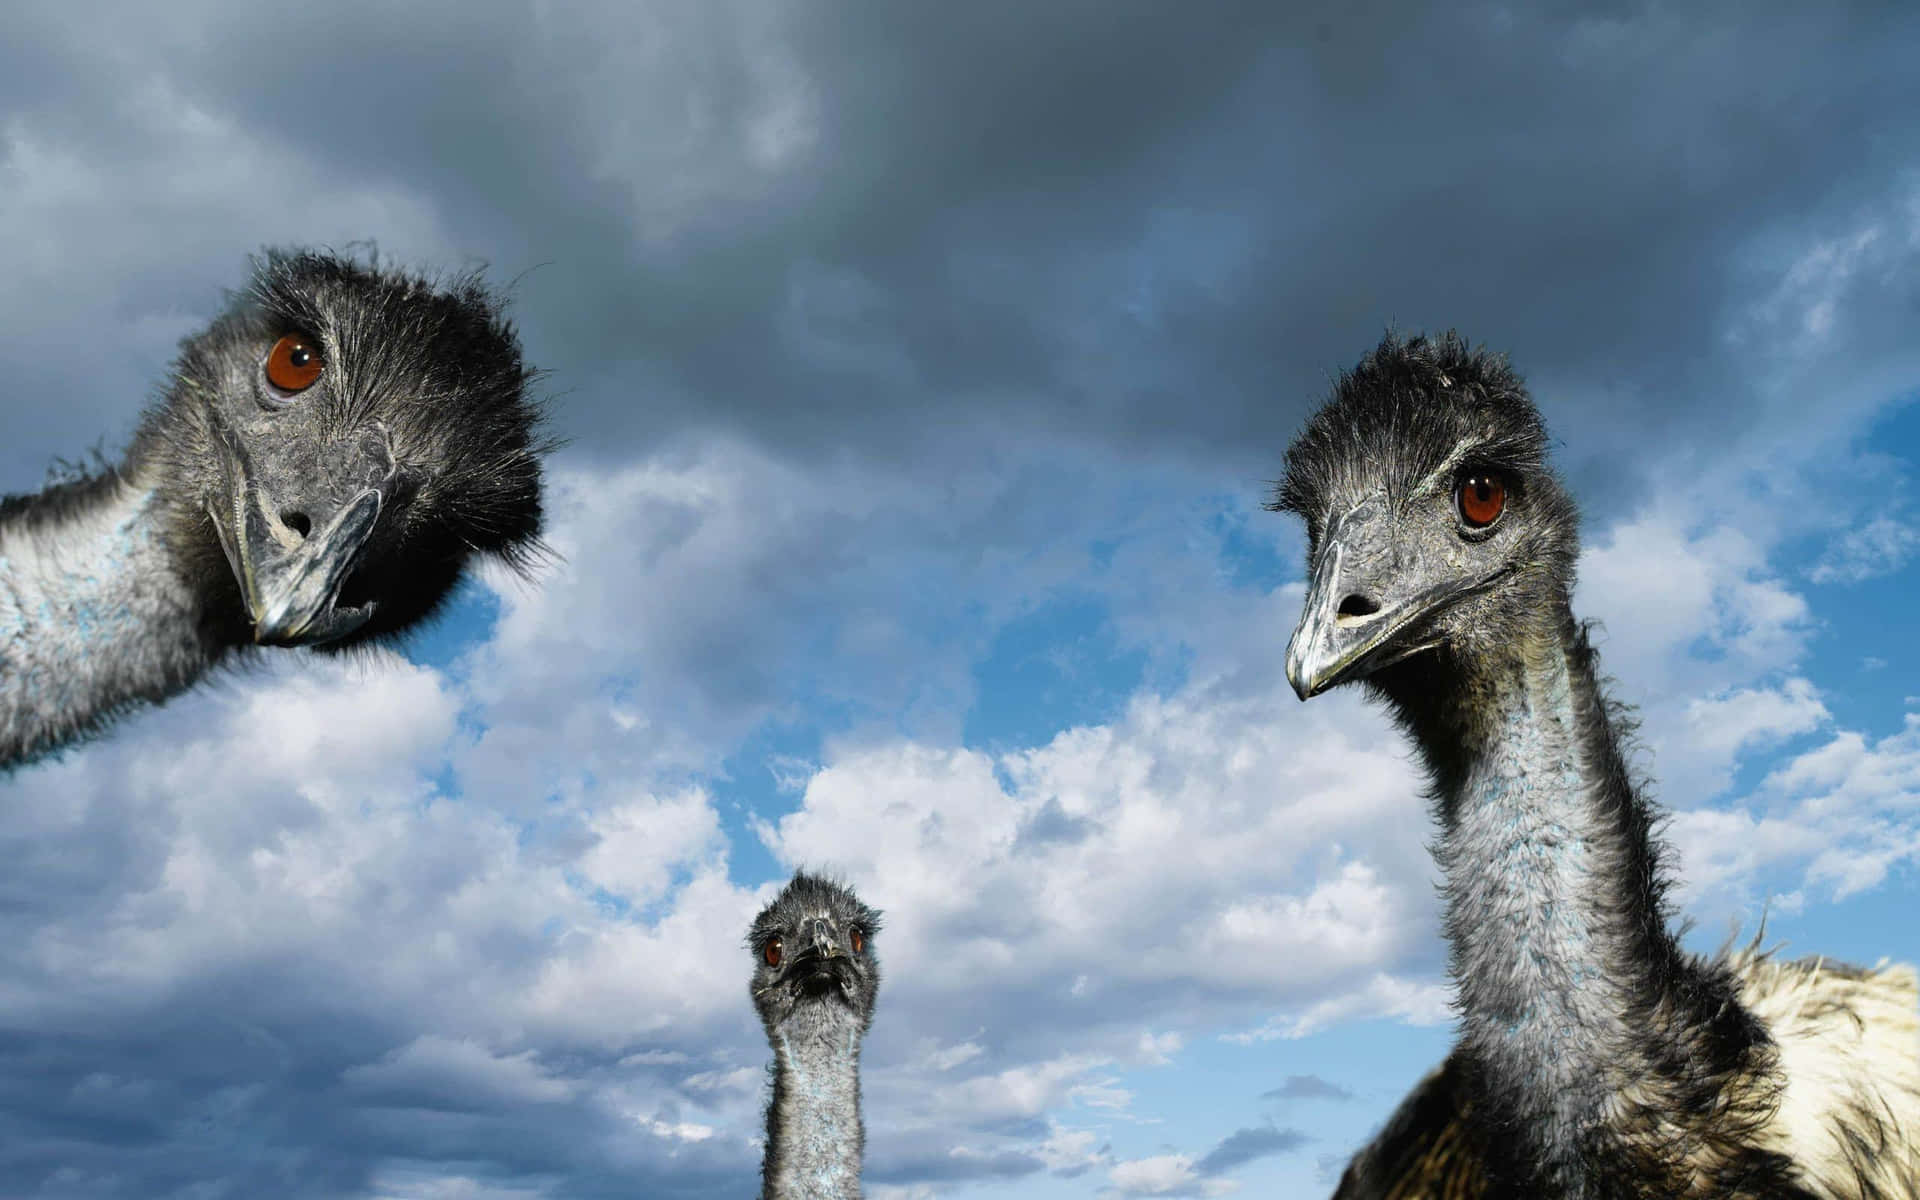 Curious Ostriches Under Cloudy Sky Wallpaper